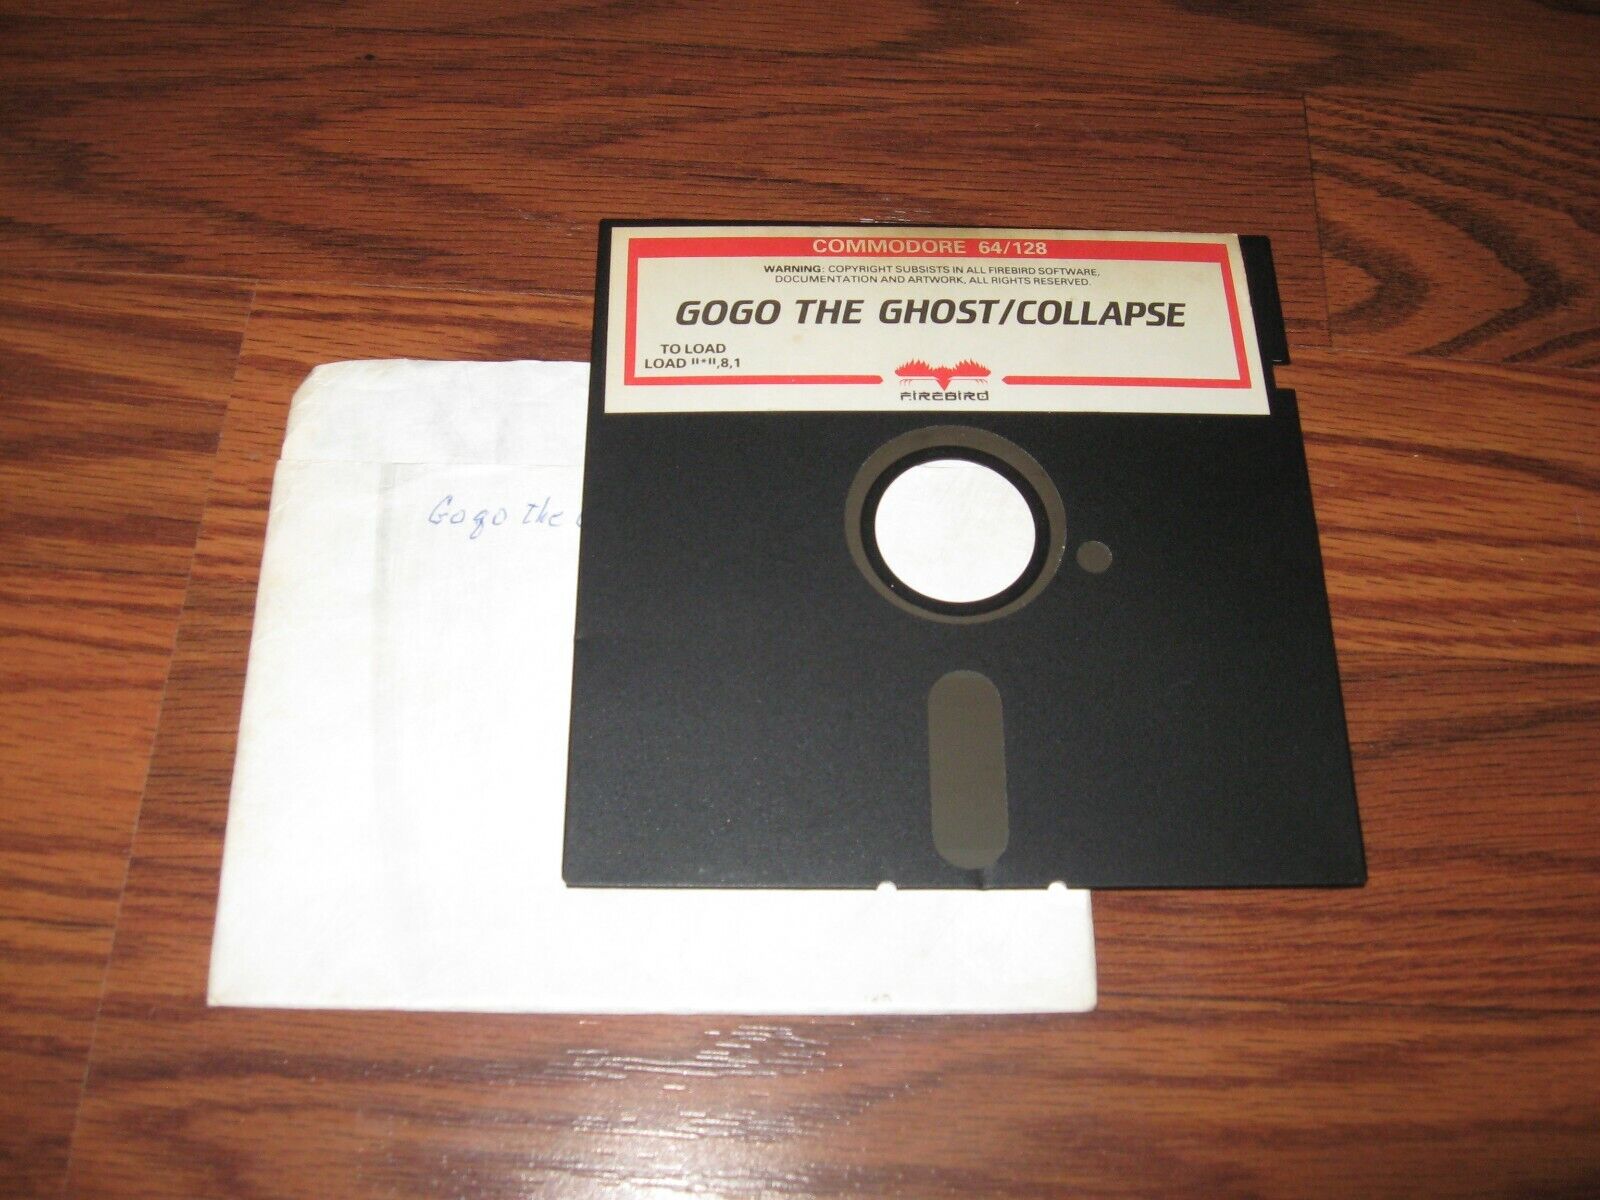 Gogo the Ghost/Collapse Commodore 64 C64 Game on 5.25\